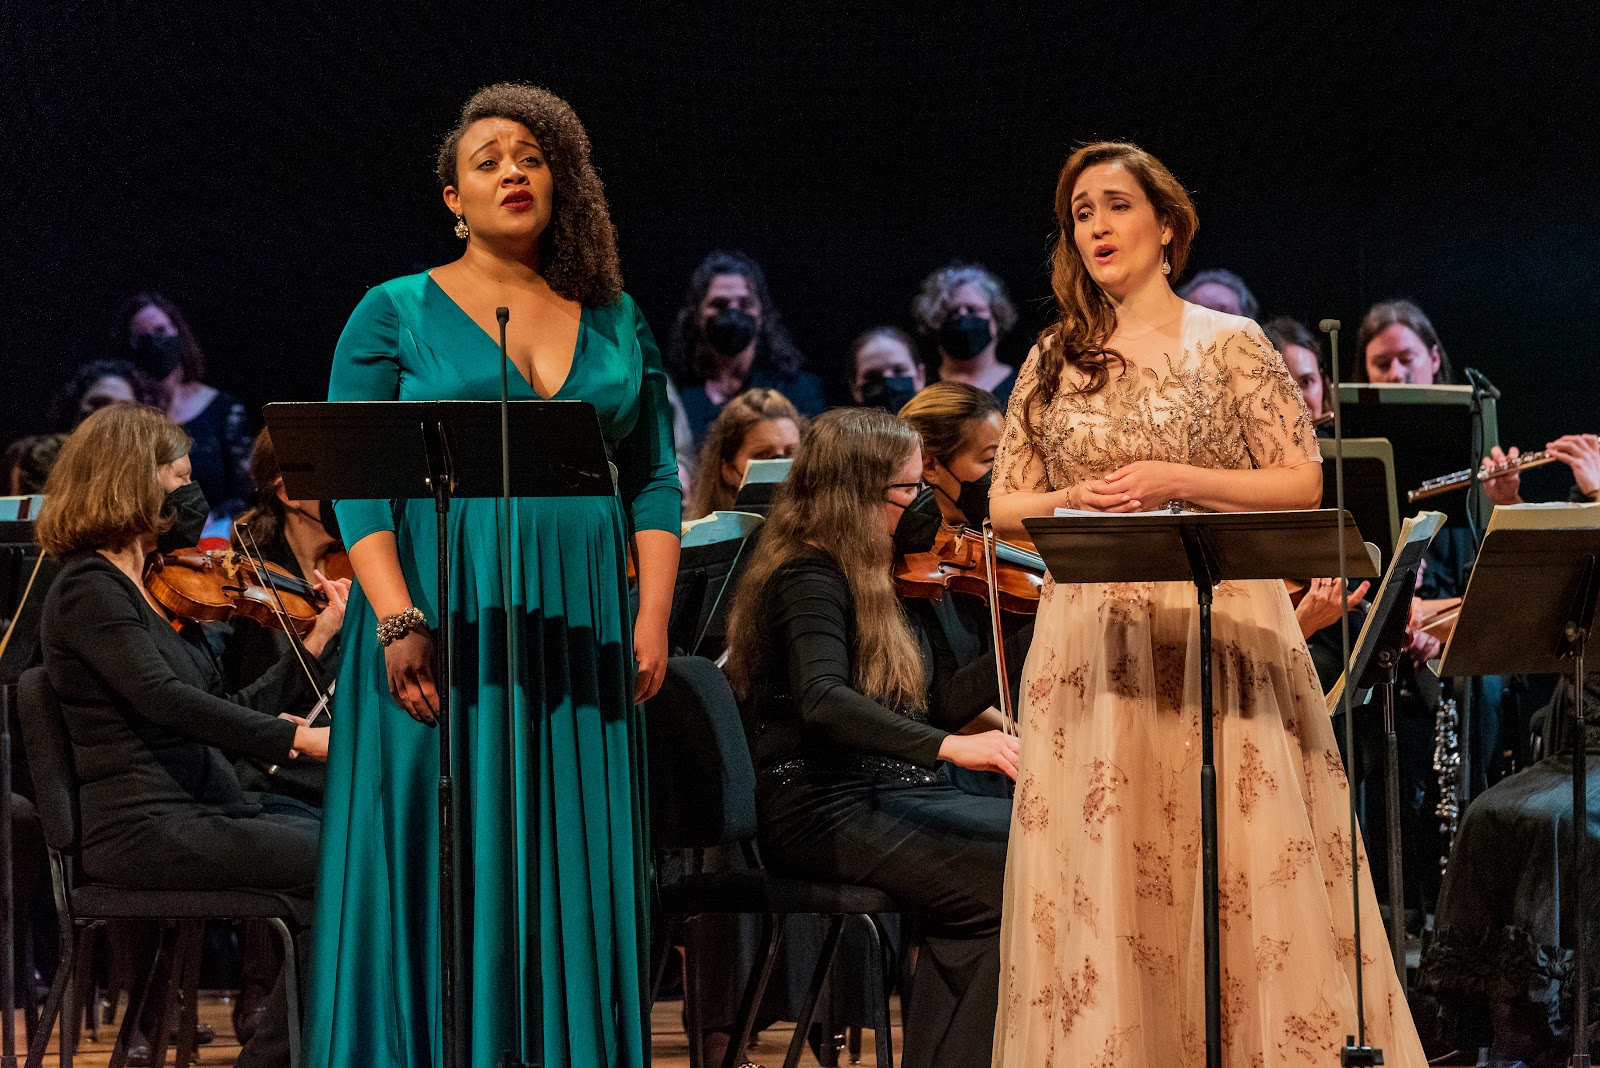 IN REVIEW: (from left to right) mezzo-soprano TAYLOR RAVEN as Mallika and soprano ERIN MORLEY as Lakmé in Washington Concert Opera's performance of Léo Delibes's LAKMÉ, 22 May 2022 [Photograph by Caitlin Oldham, © by Washington Concert Opera]